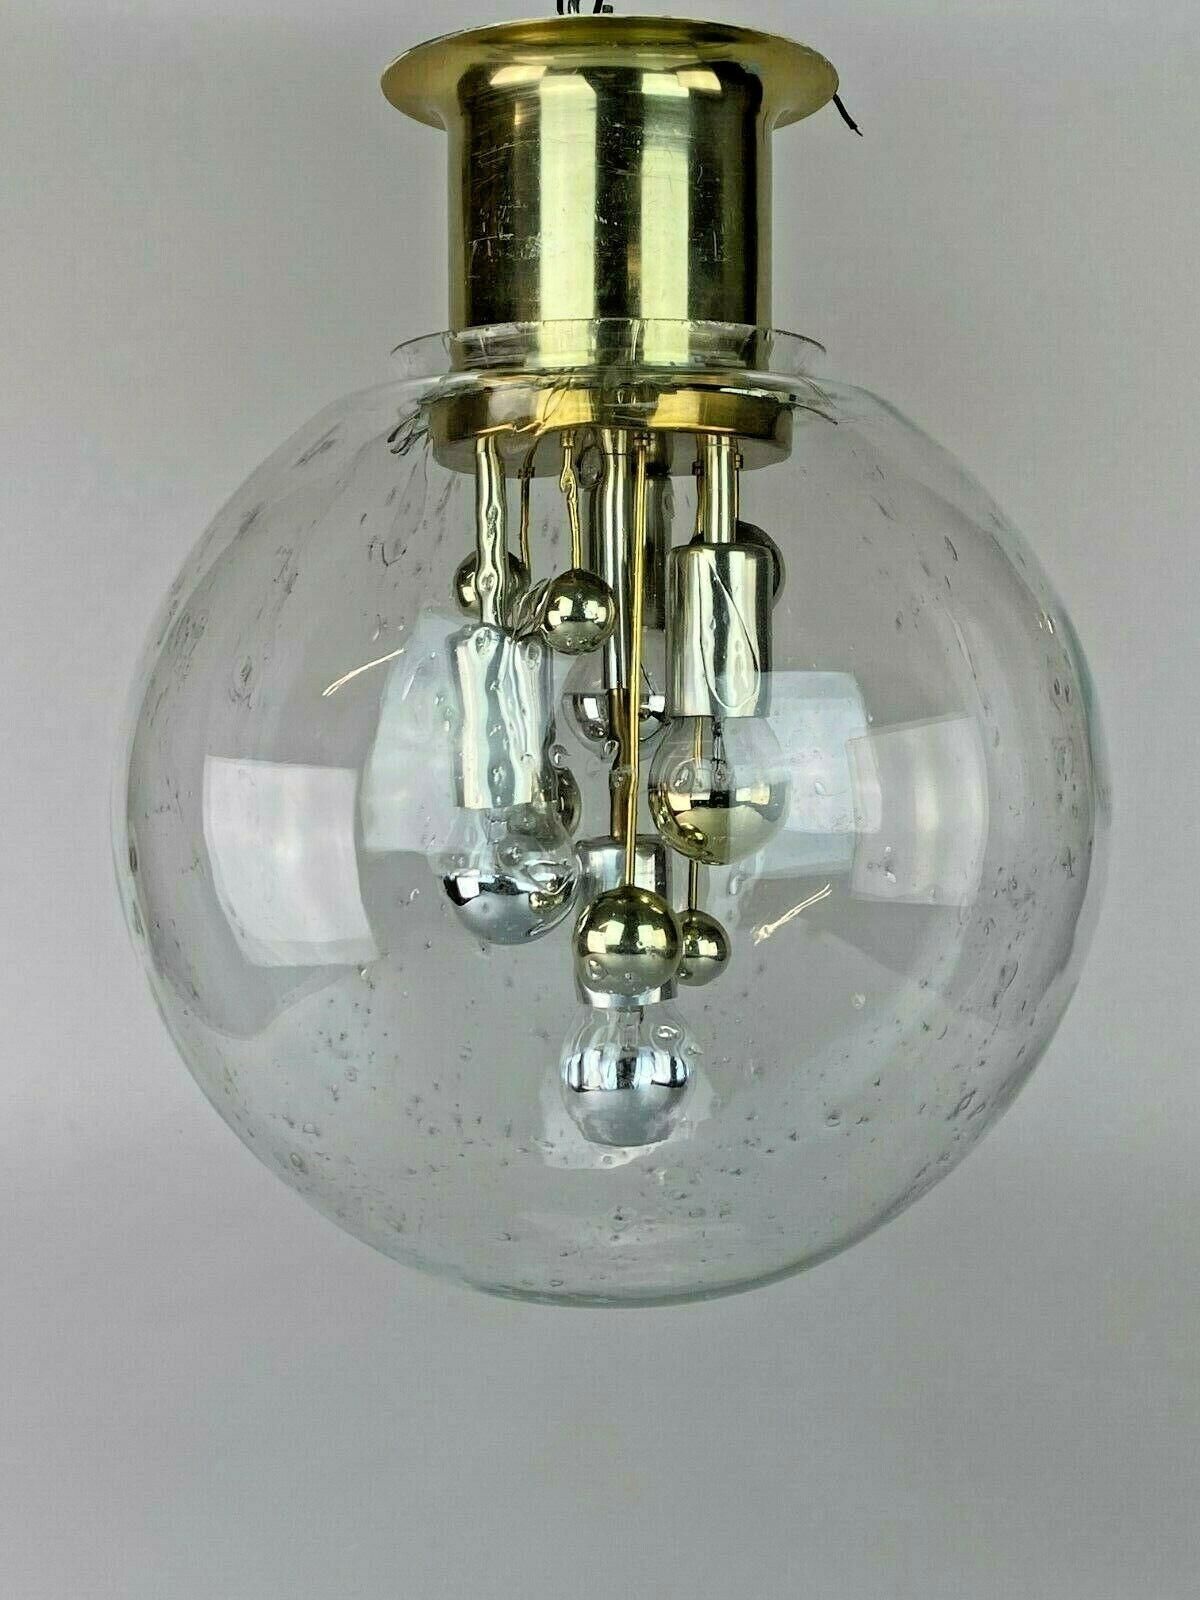 60s 70s lamp light ceiling lamp ball lamp Doria glass space age design

Object: spherical lamp

Manufacturer: Doria

Condition: good

Age: around 1960-1970

Dimensions:

Diameter = 40cm
Height = 50cm

Other notes:

The pictures